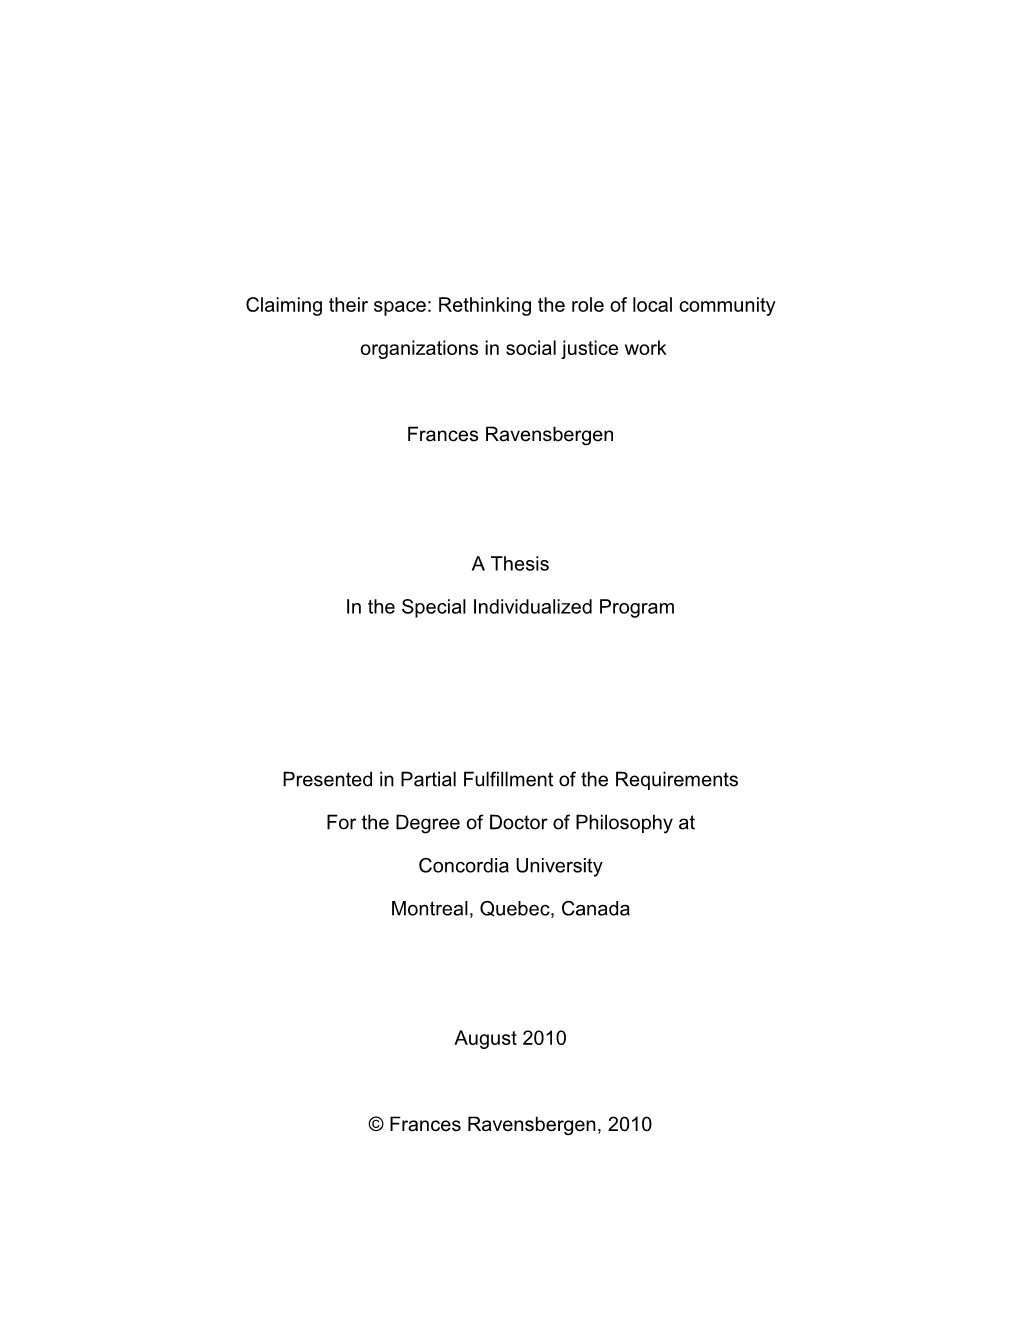 Rethinking the Role of Local Community Organizations in Social Justice Work and Submitted in Partial Fulfillment of the Requirements for the Degree Of